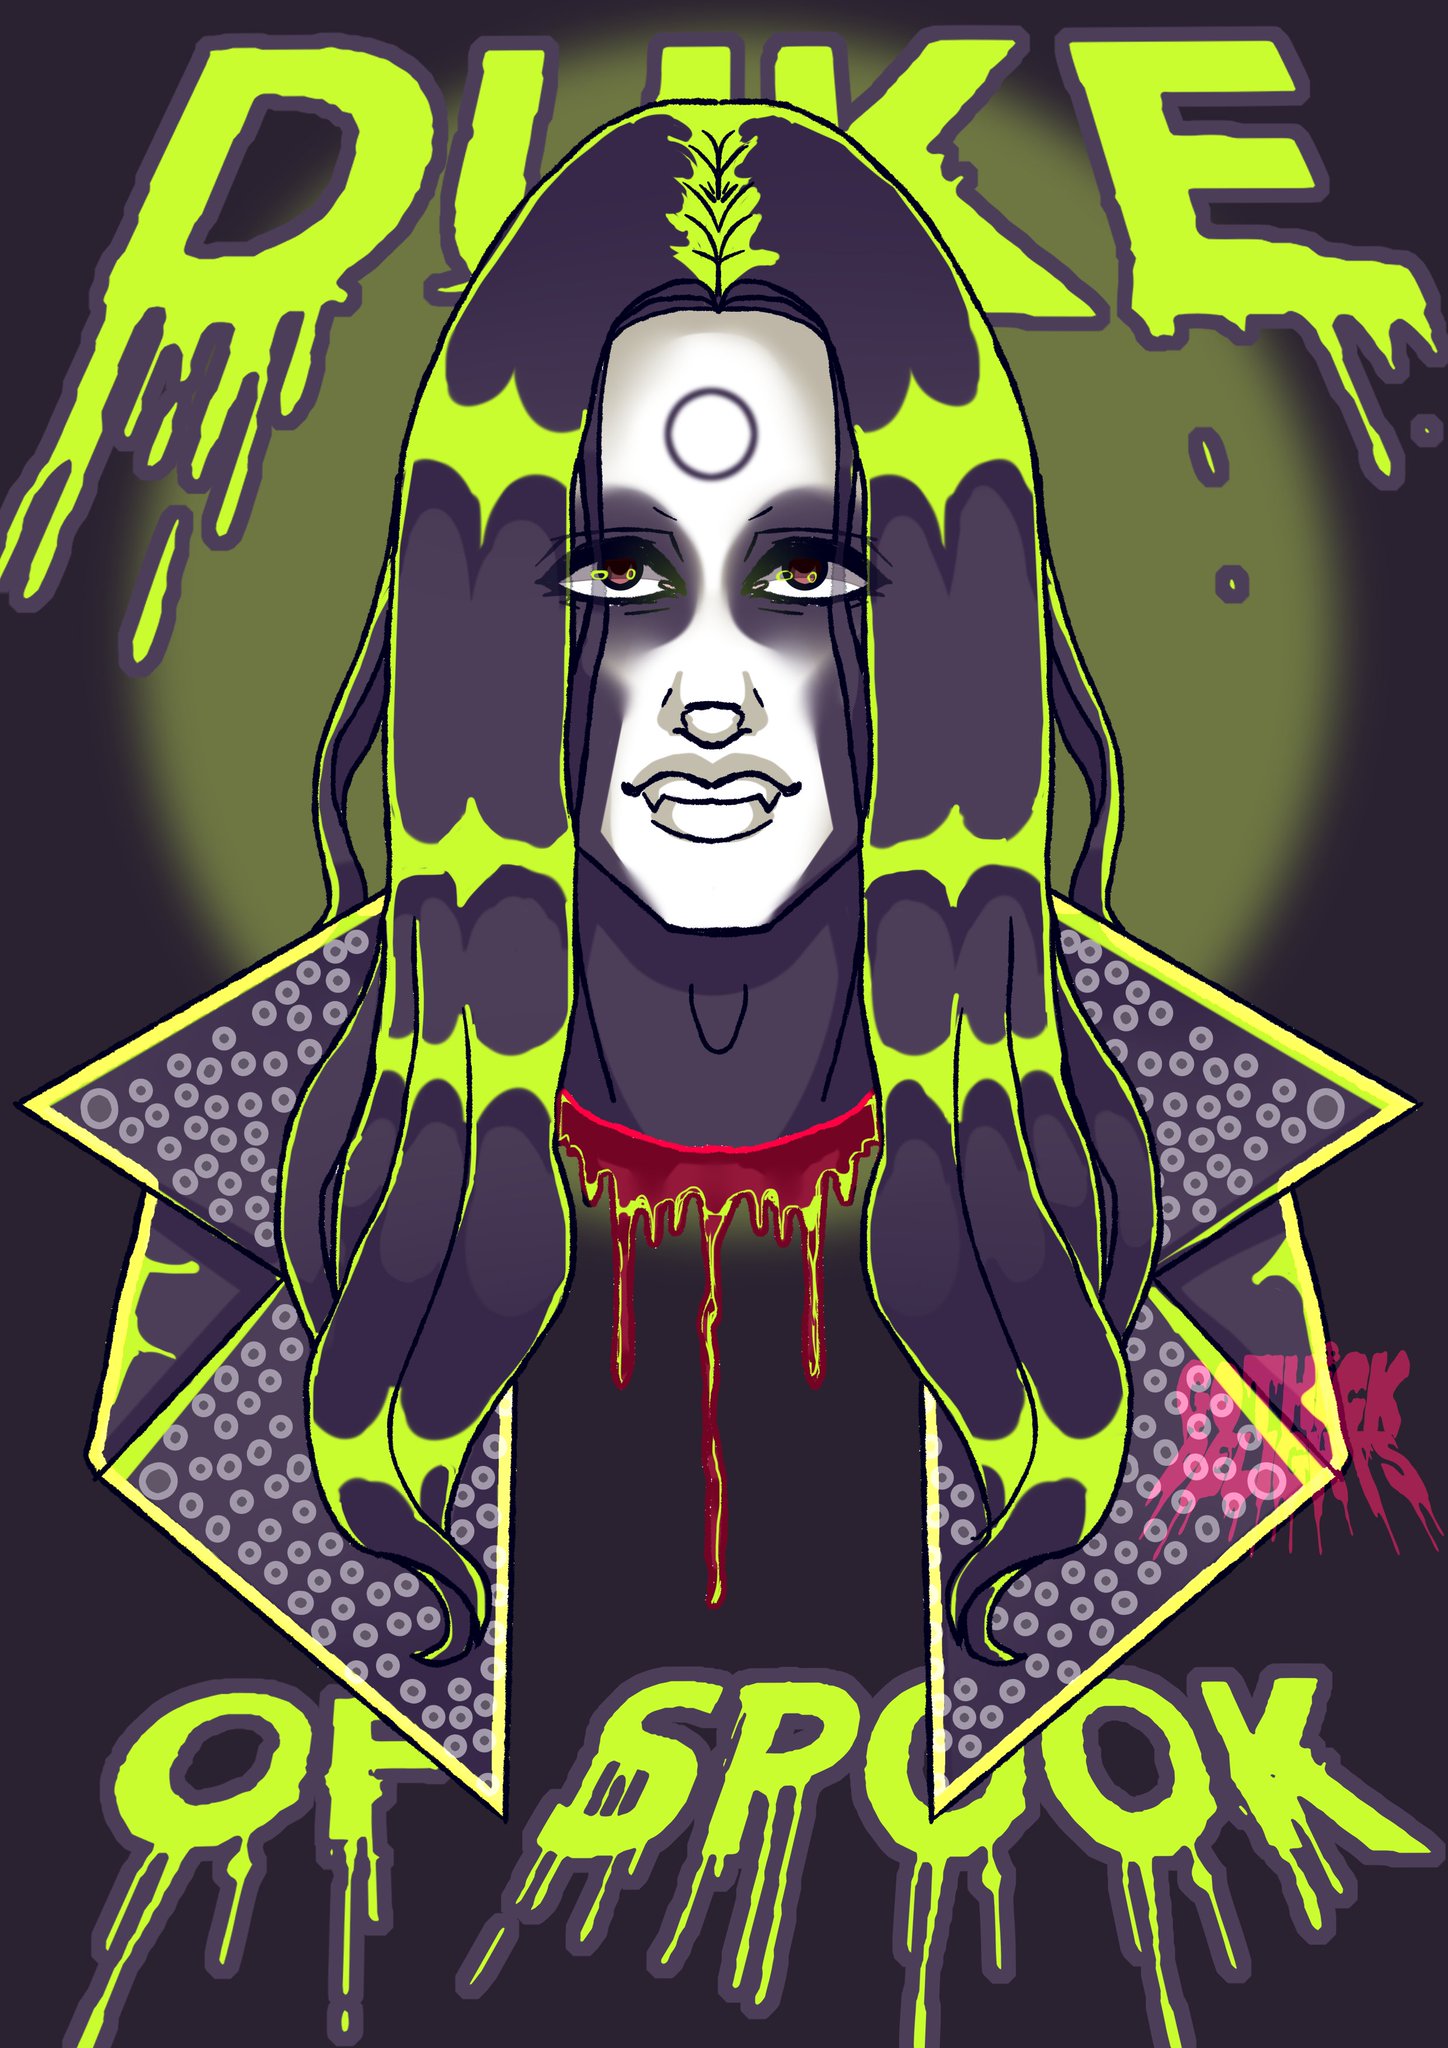 Happy Birthday to one of my favorite musicians and one of the coolest people, Wednesday 13 AKA: The Duke of Spook  